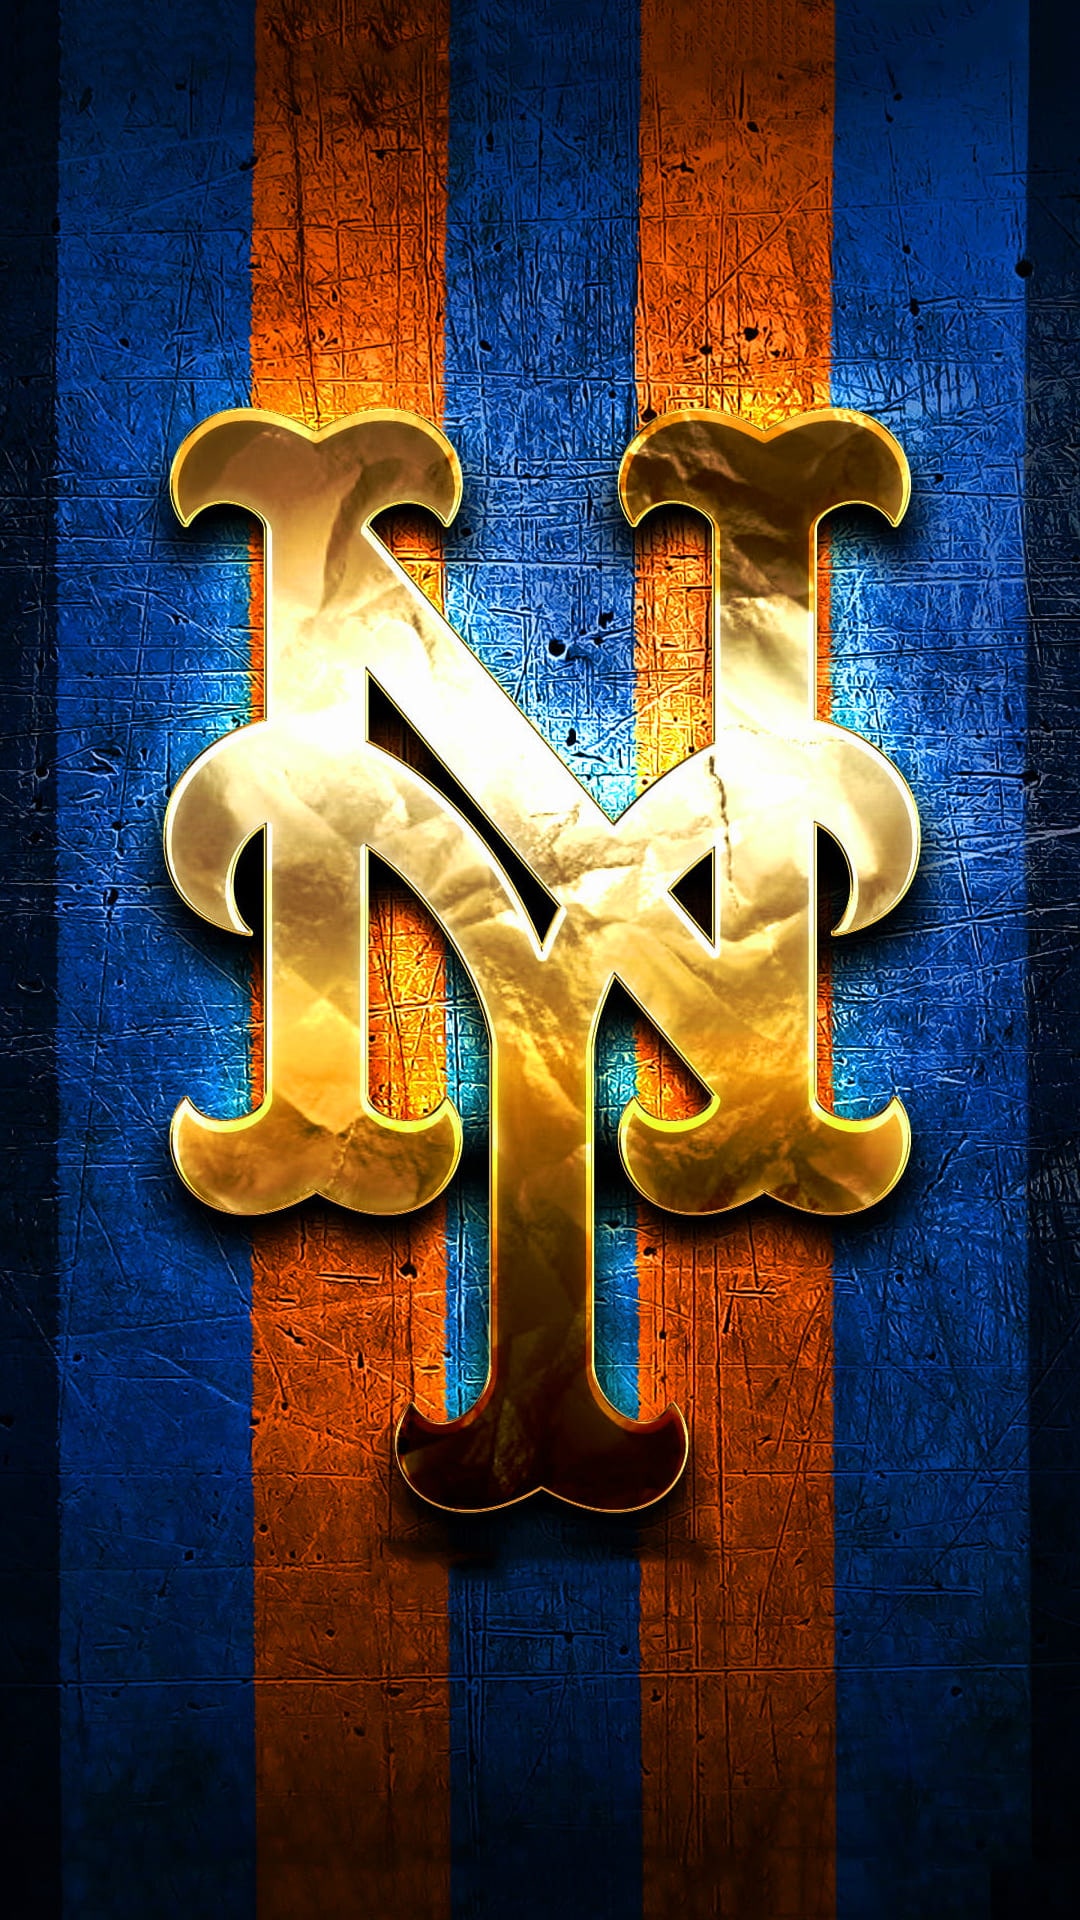 NY Mets Wallpapers